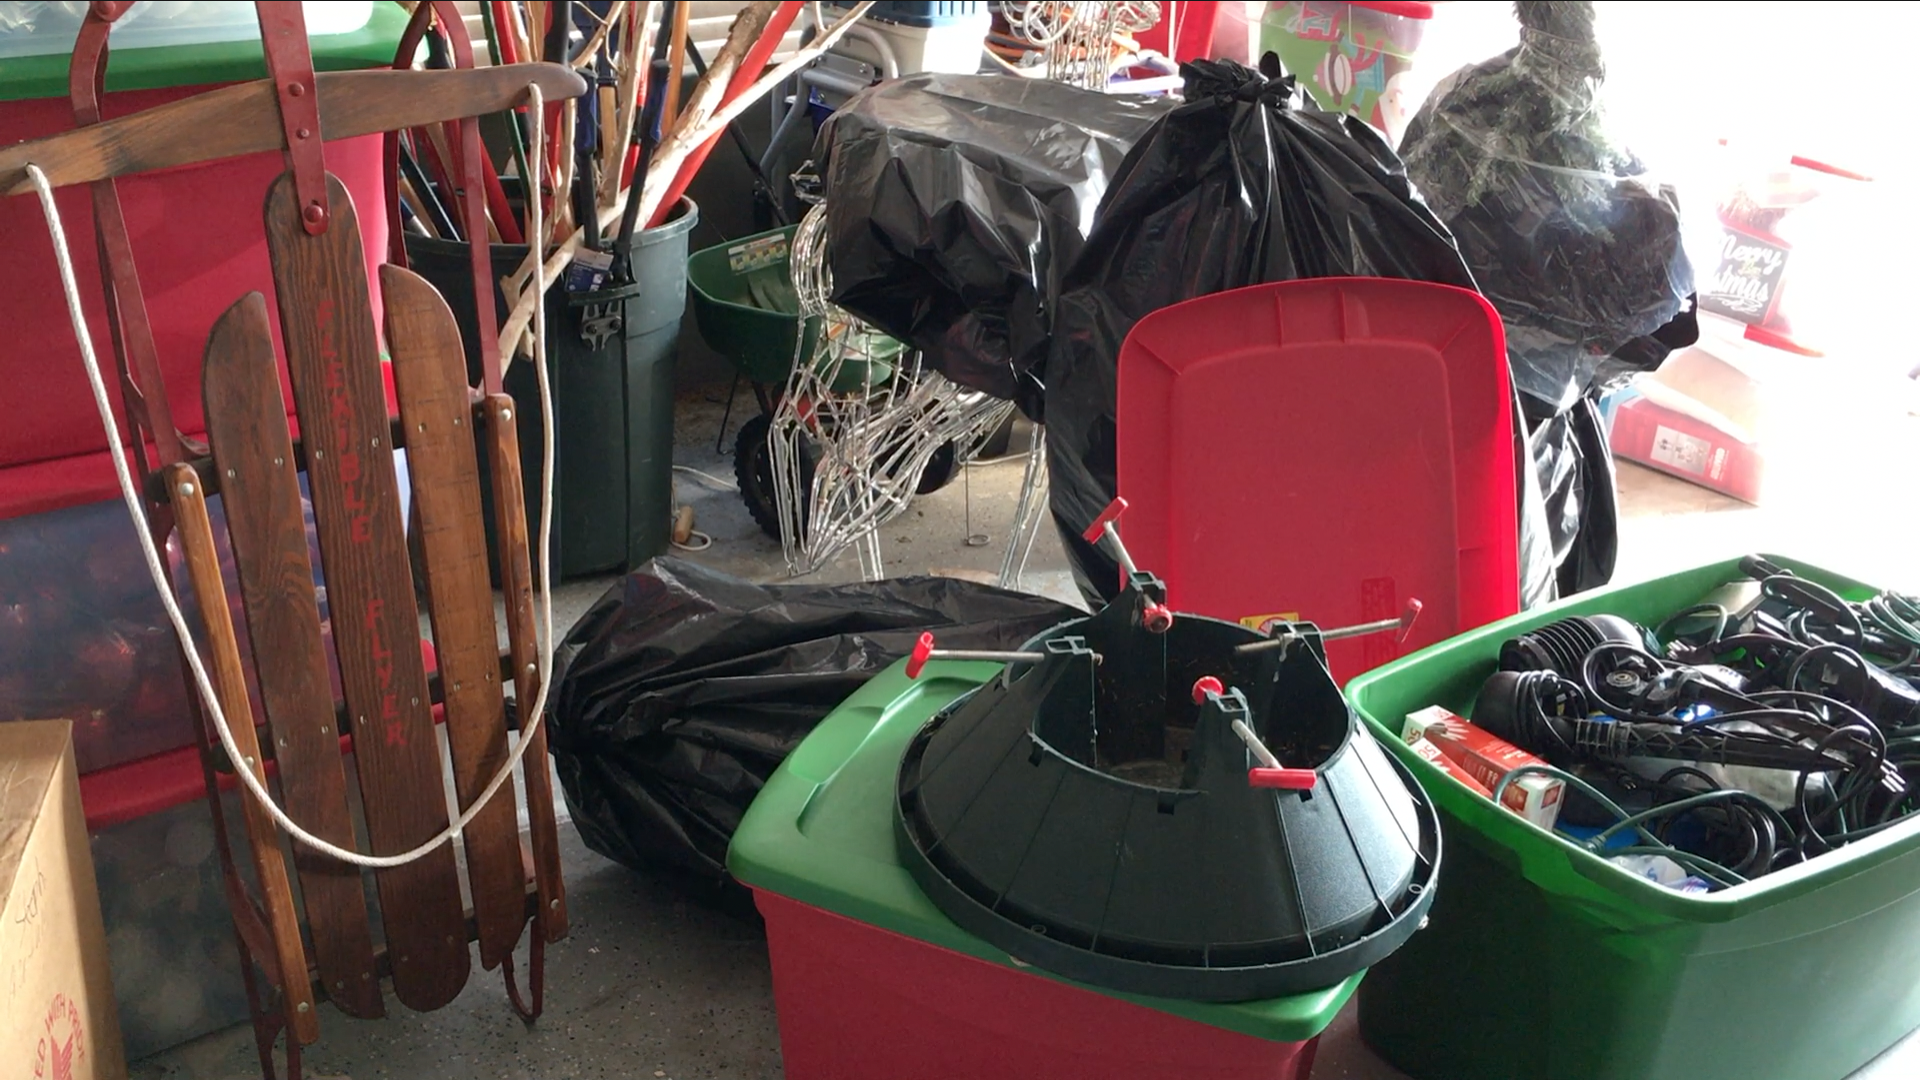 Christmas Cleanup storage and organization